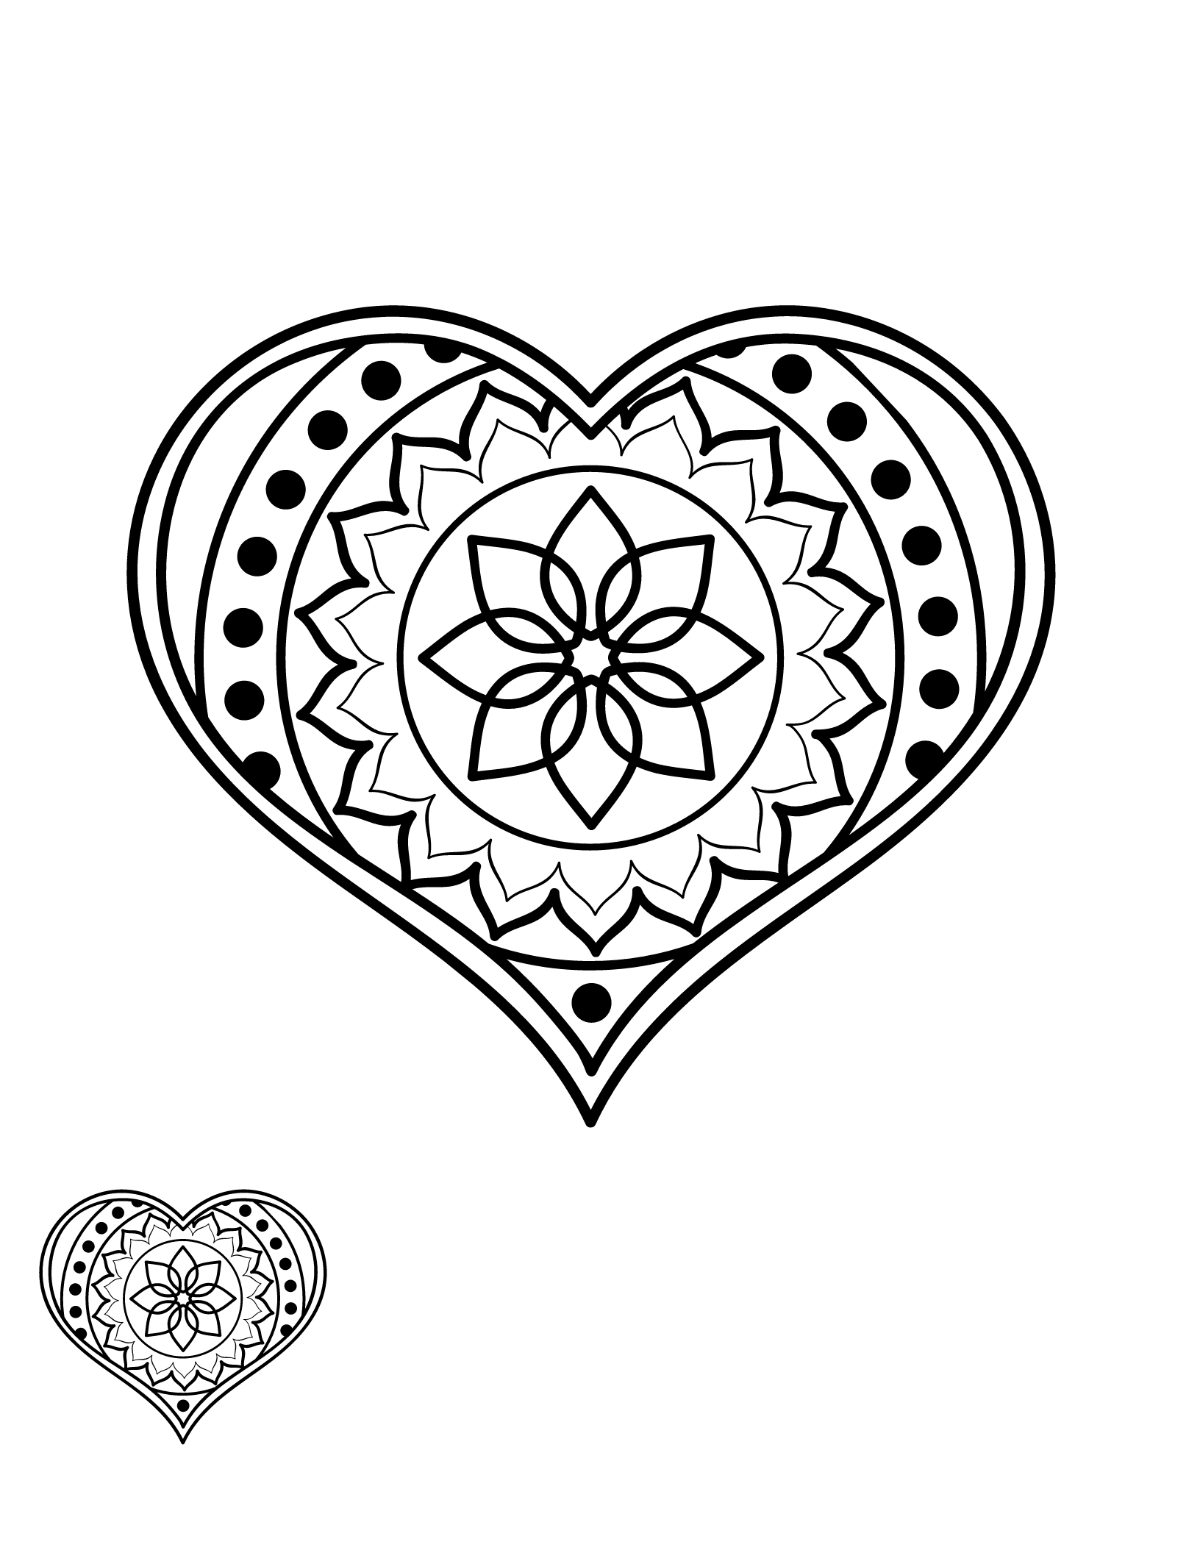 Mandala Heart Coloring Page for Adults Template